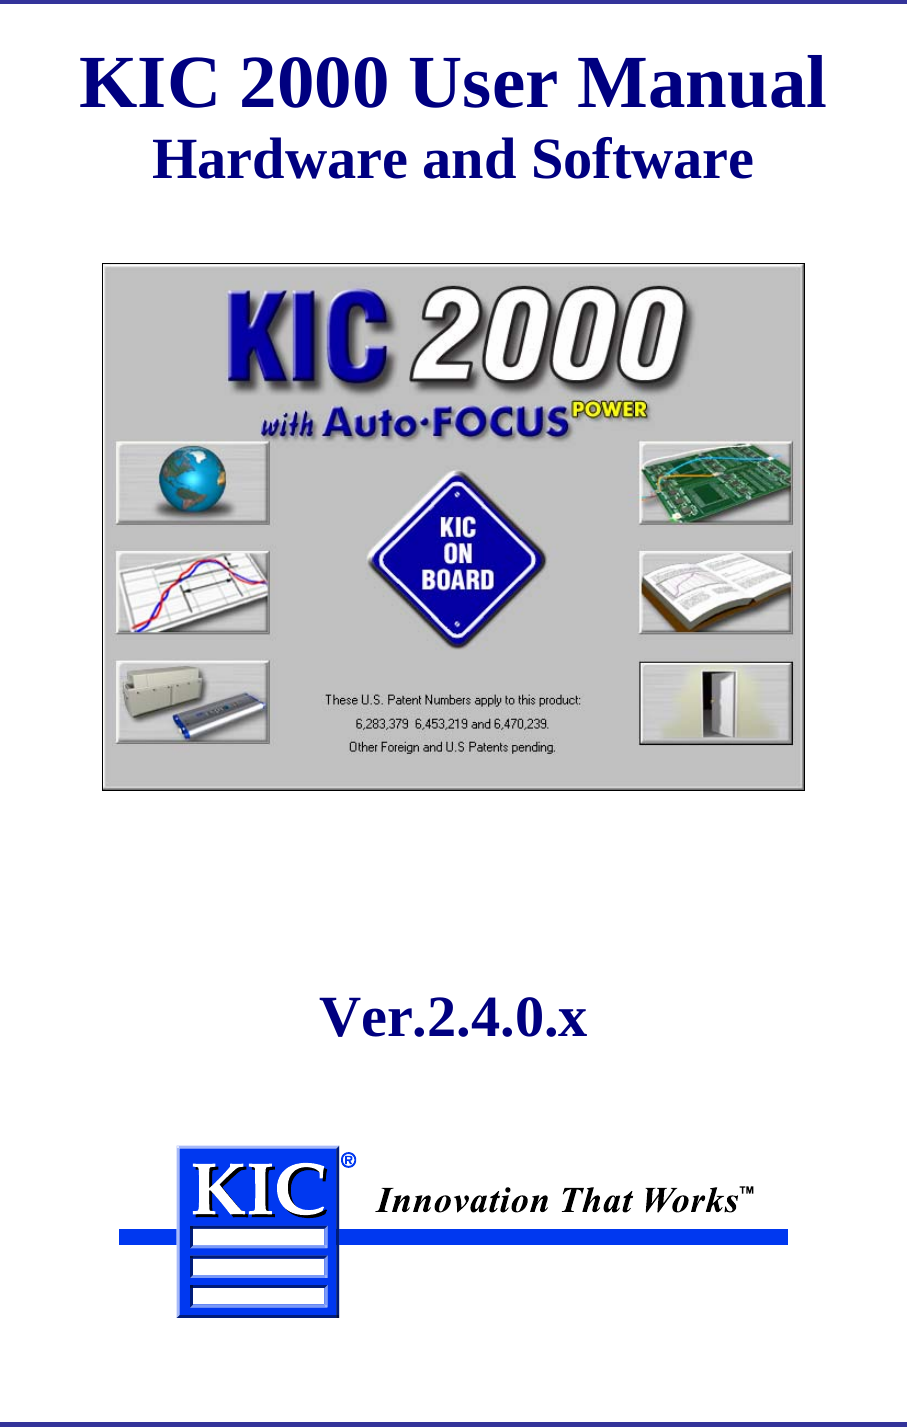     KIC 2000 User Manual Hardware and Software             Ver.2.4.0.x        